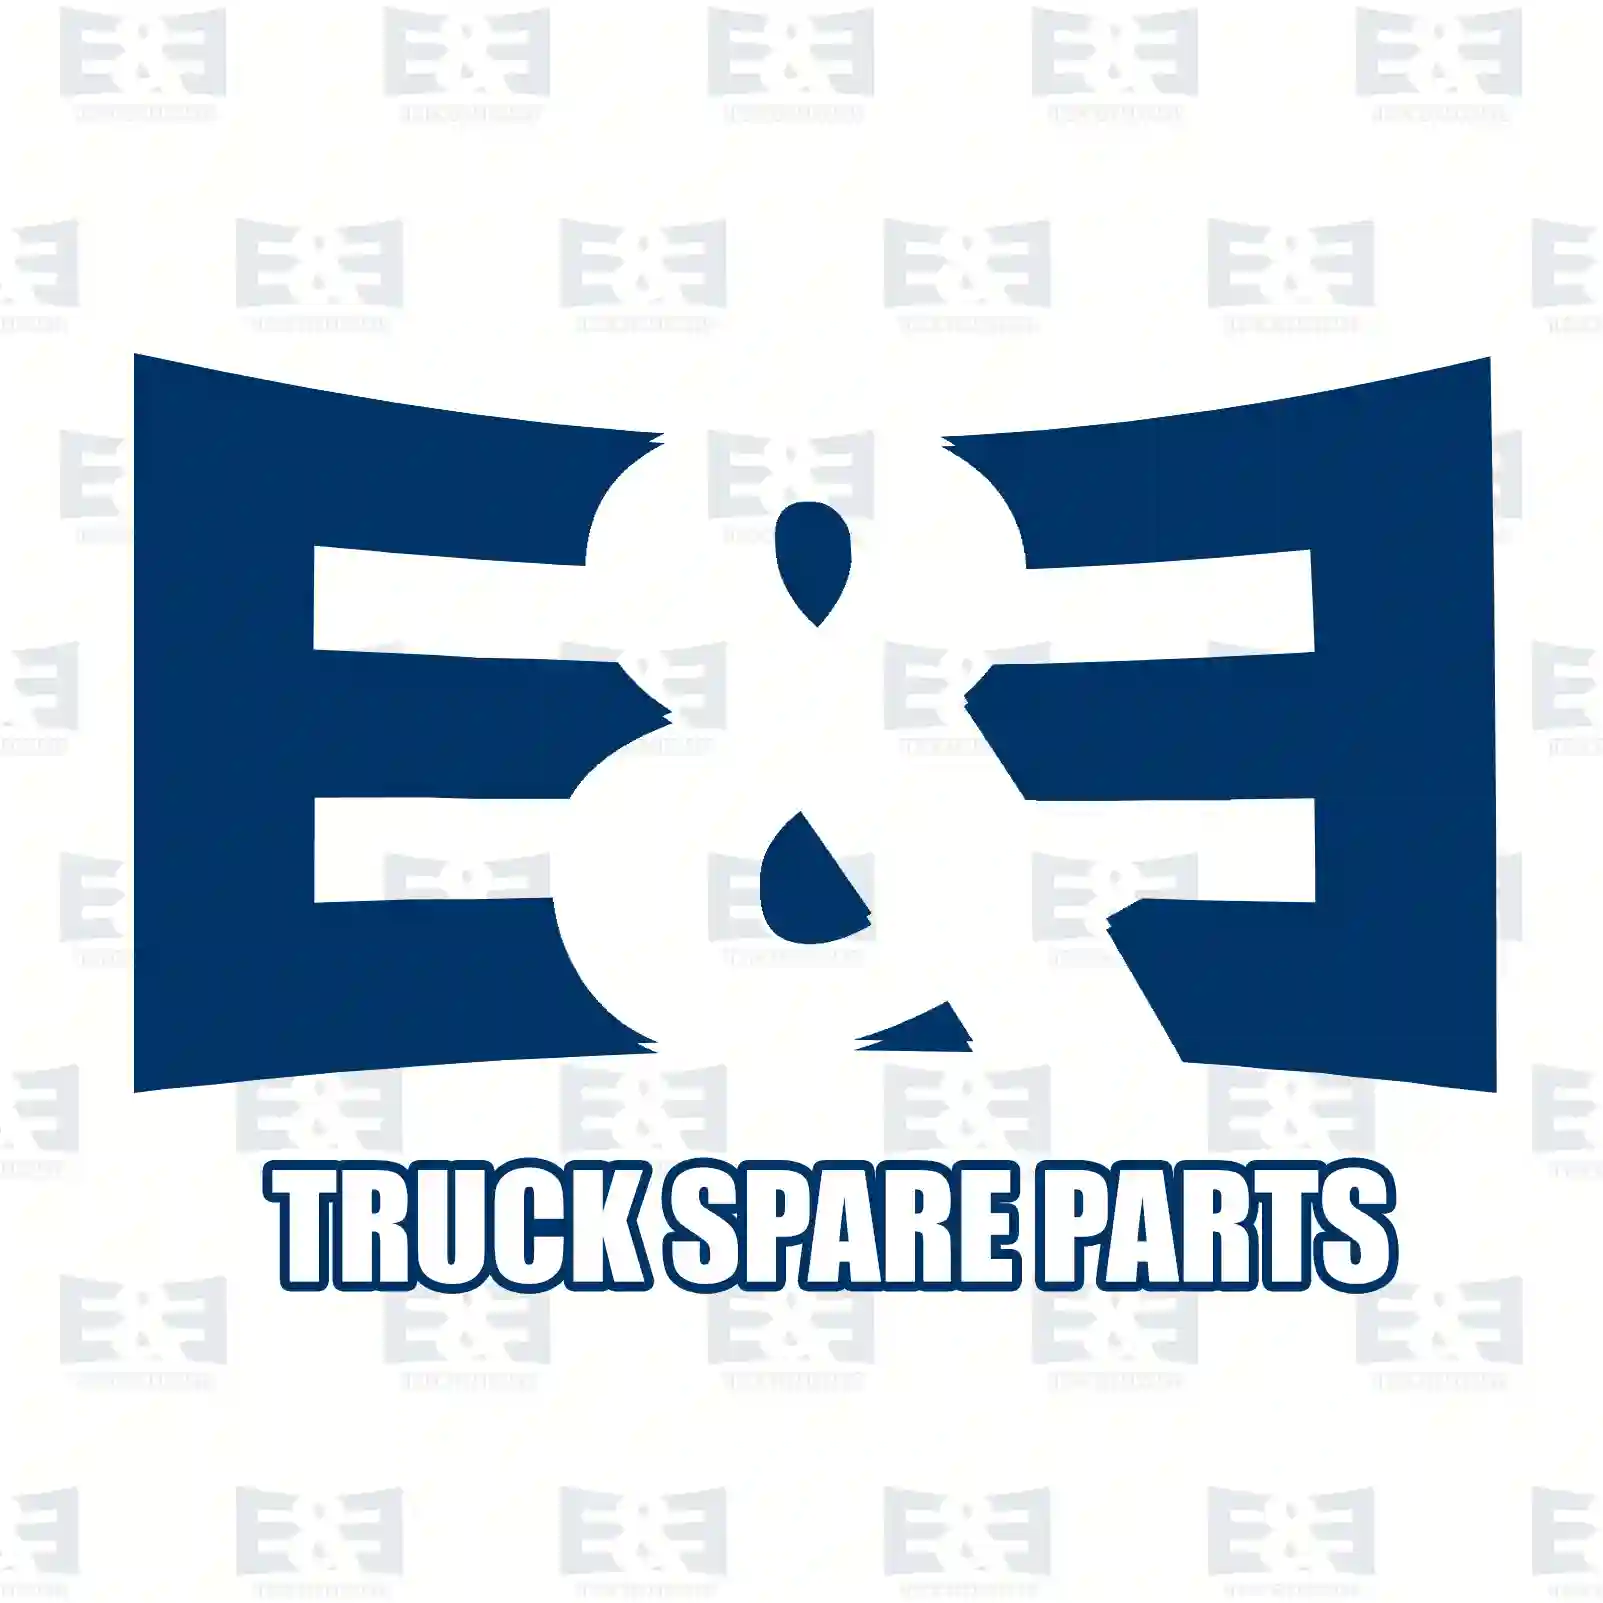  Repair kit, feed pump || E&E Truck Spare Parts | Truck Spare Parts, Auotomotive Spare Parts